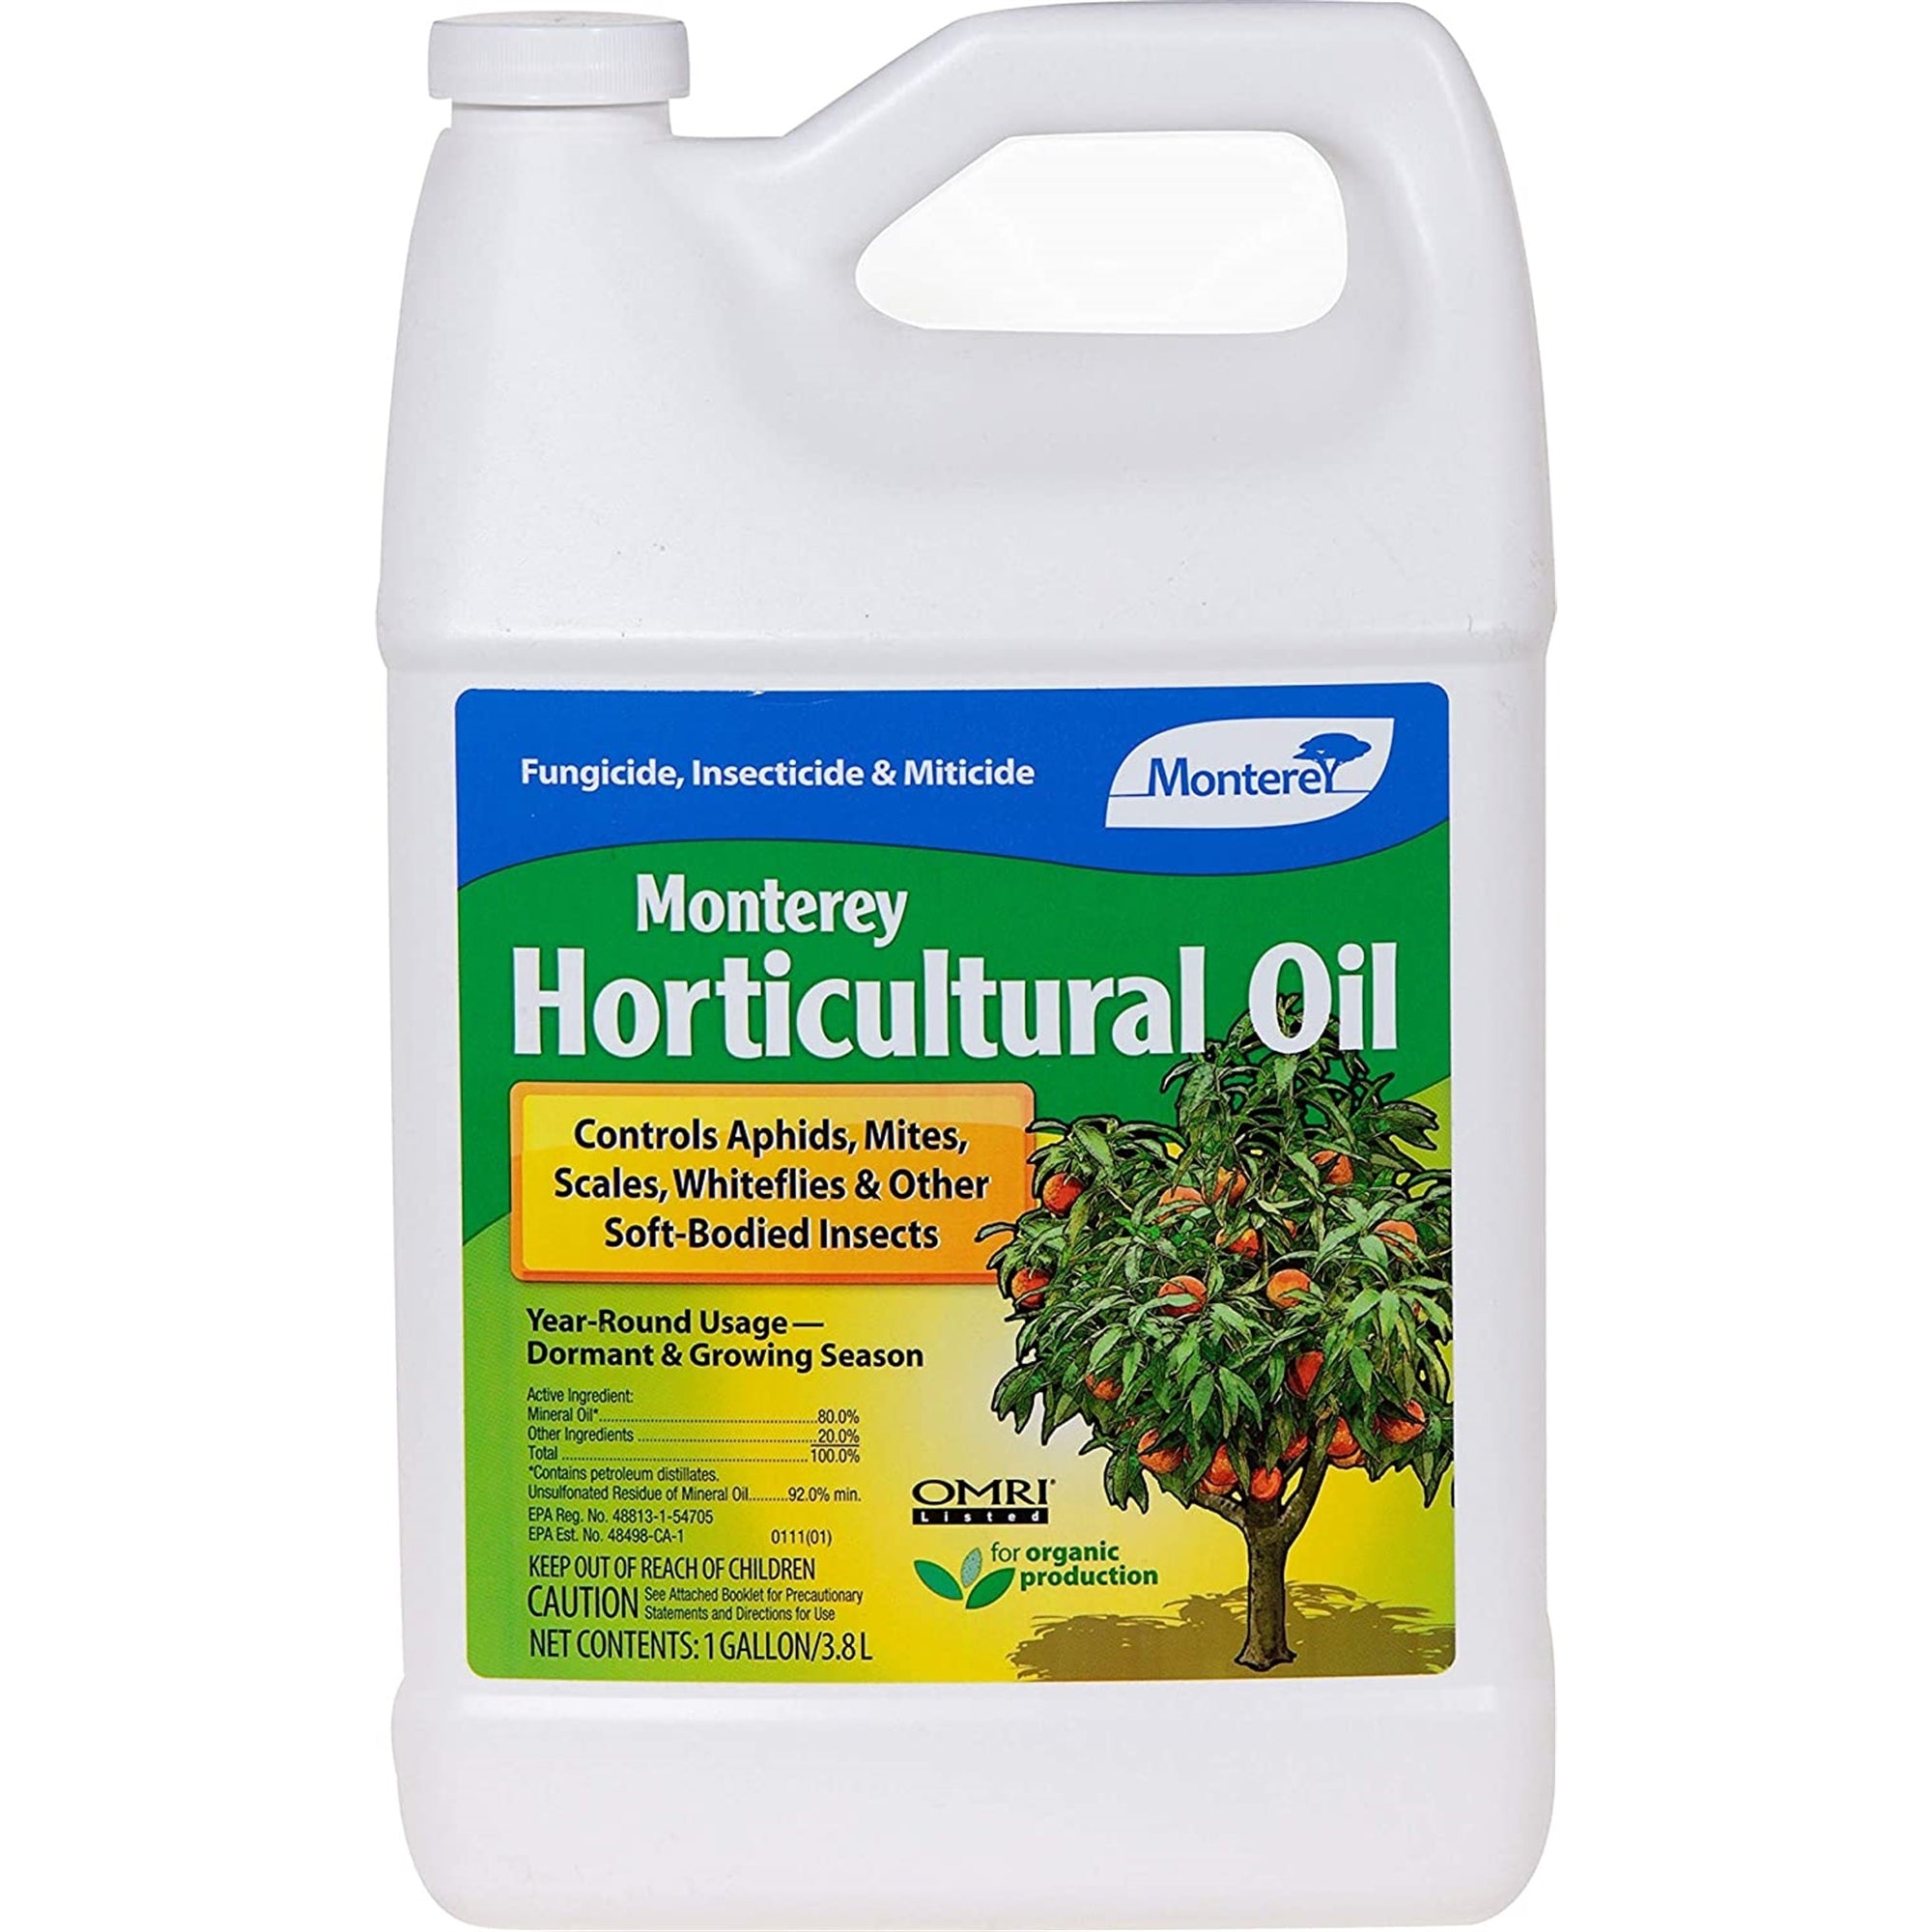 Monterey Horticultural Oil Controls Aphids, Fungicide, Miticide, and Insecticide, 1 Gal